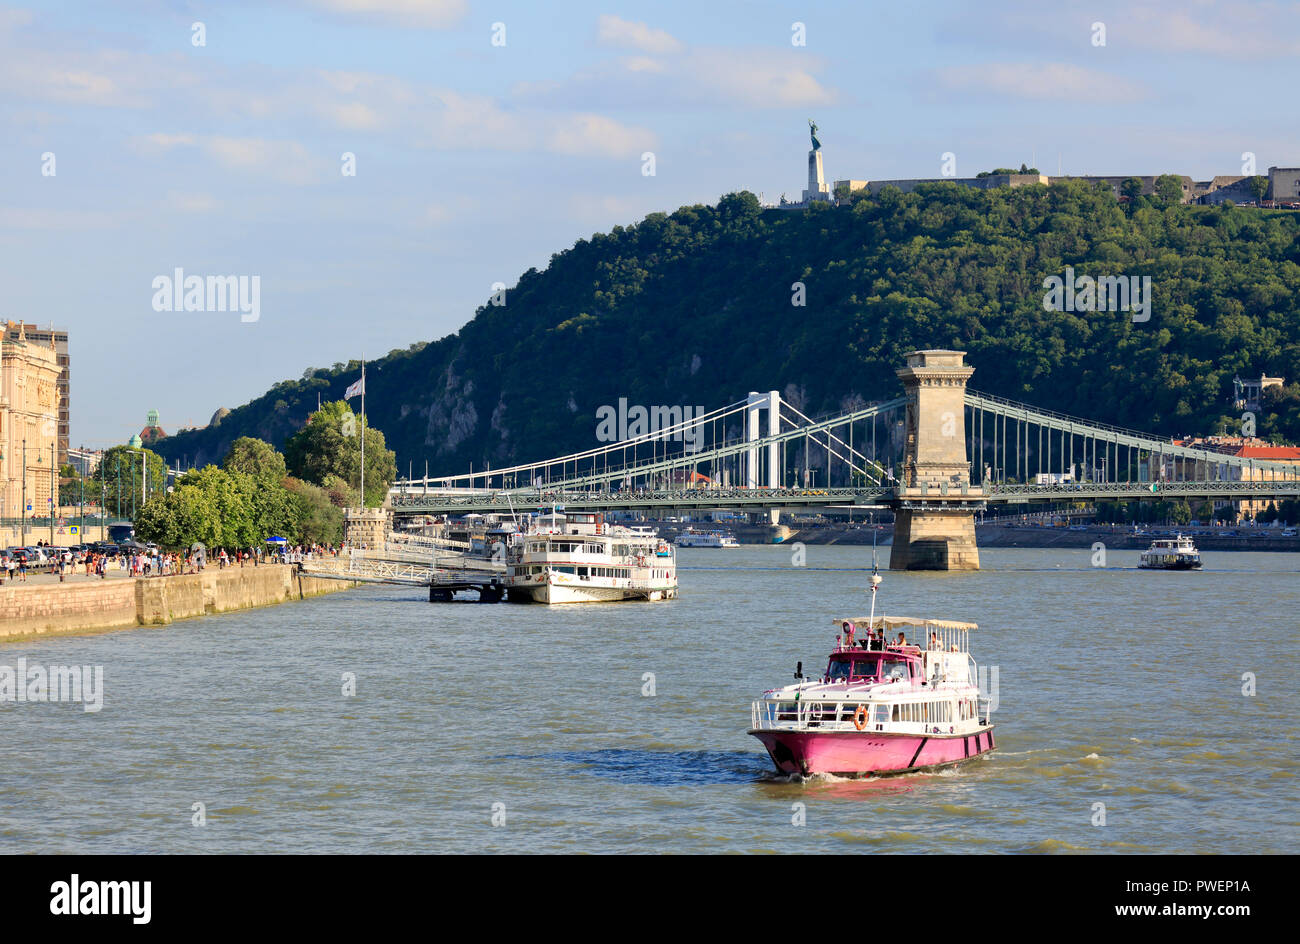 Hungary, Central Hungary, Budapest, Danube, Capital City, Danube river landscape with motorboat and cruiser, behind the Istvan Szechenyi Chain Bridge and the Elisabeth Bridge between Pest and Buda, in the background the Gellert Hill with the Liberty Monument and the Liberty statue, Danube cruise, river navigation, UNESCO World Heritage Site Stock Photo